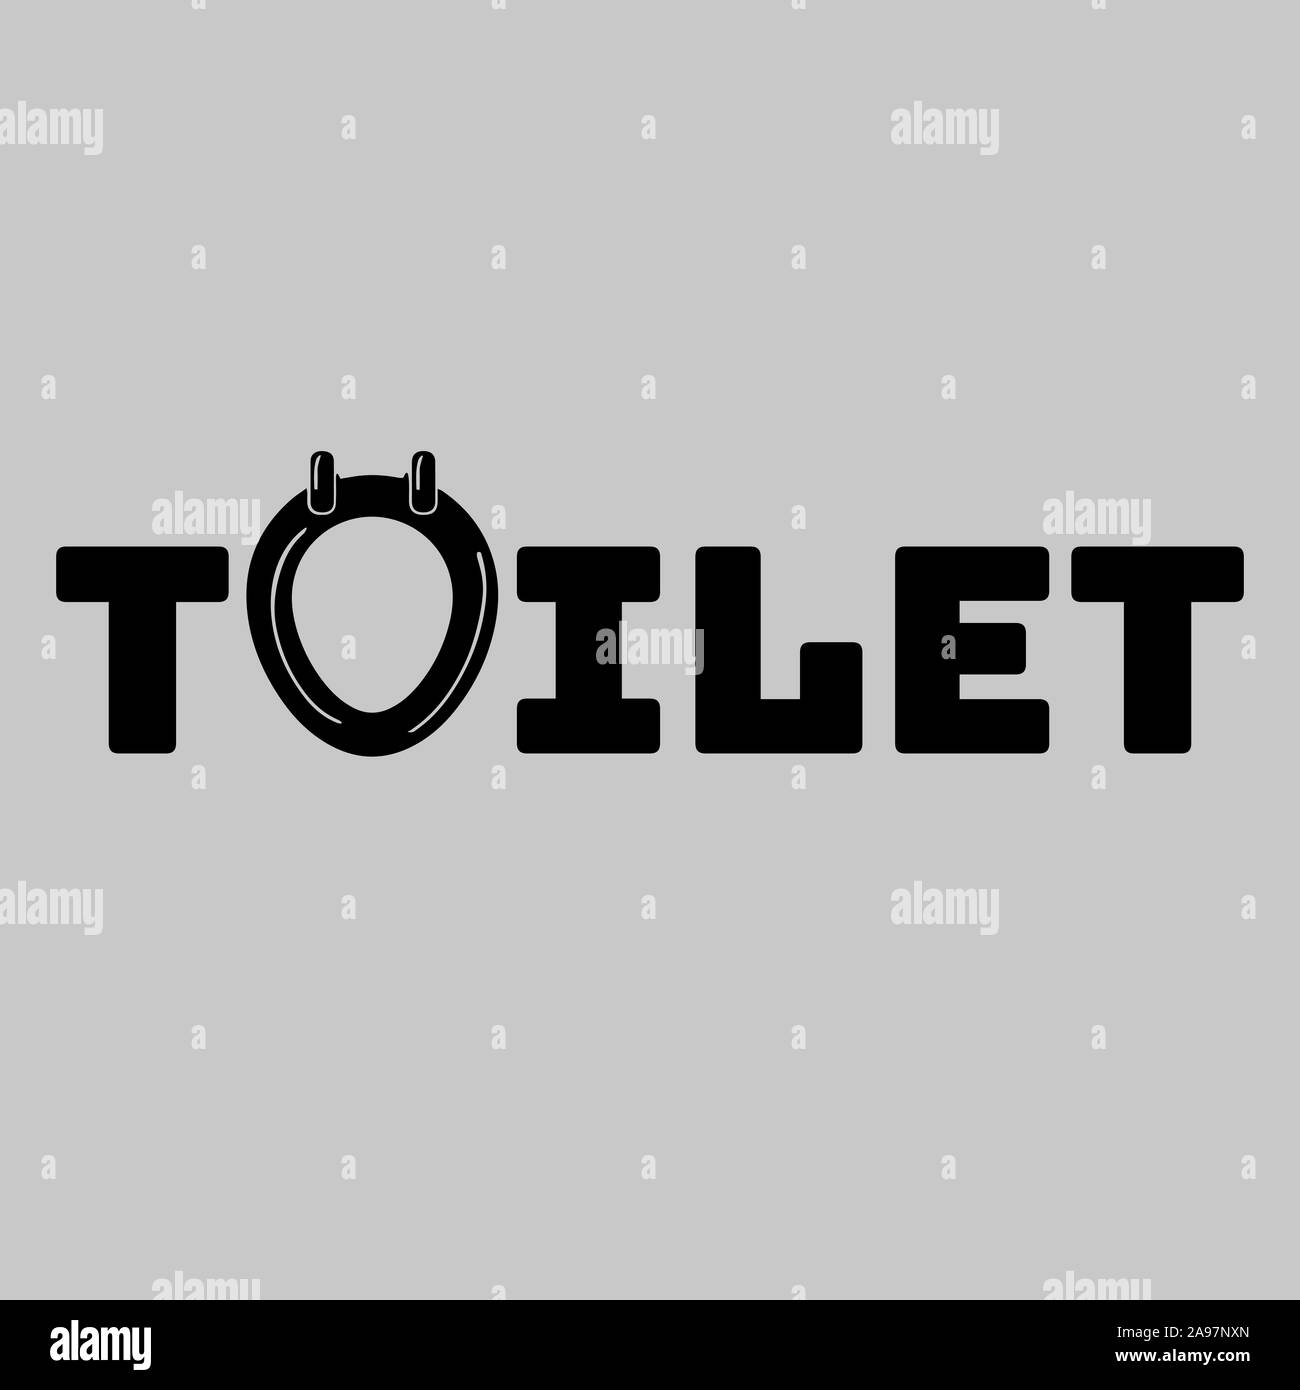 Toilet Sign vector illustration. Simply flat design for logo, objects and icons. Restroom for Male, Female, Ladies, Gentlemens. Stock Vector